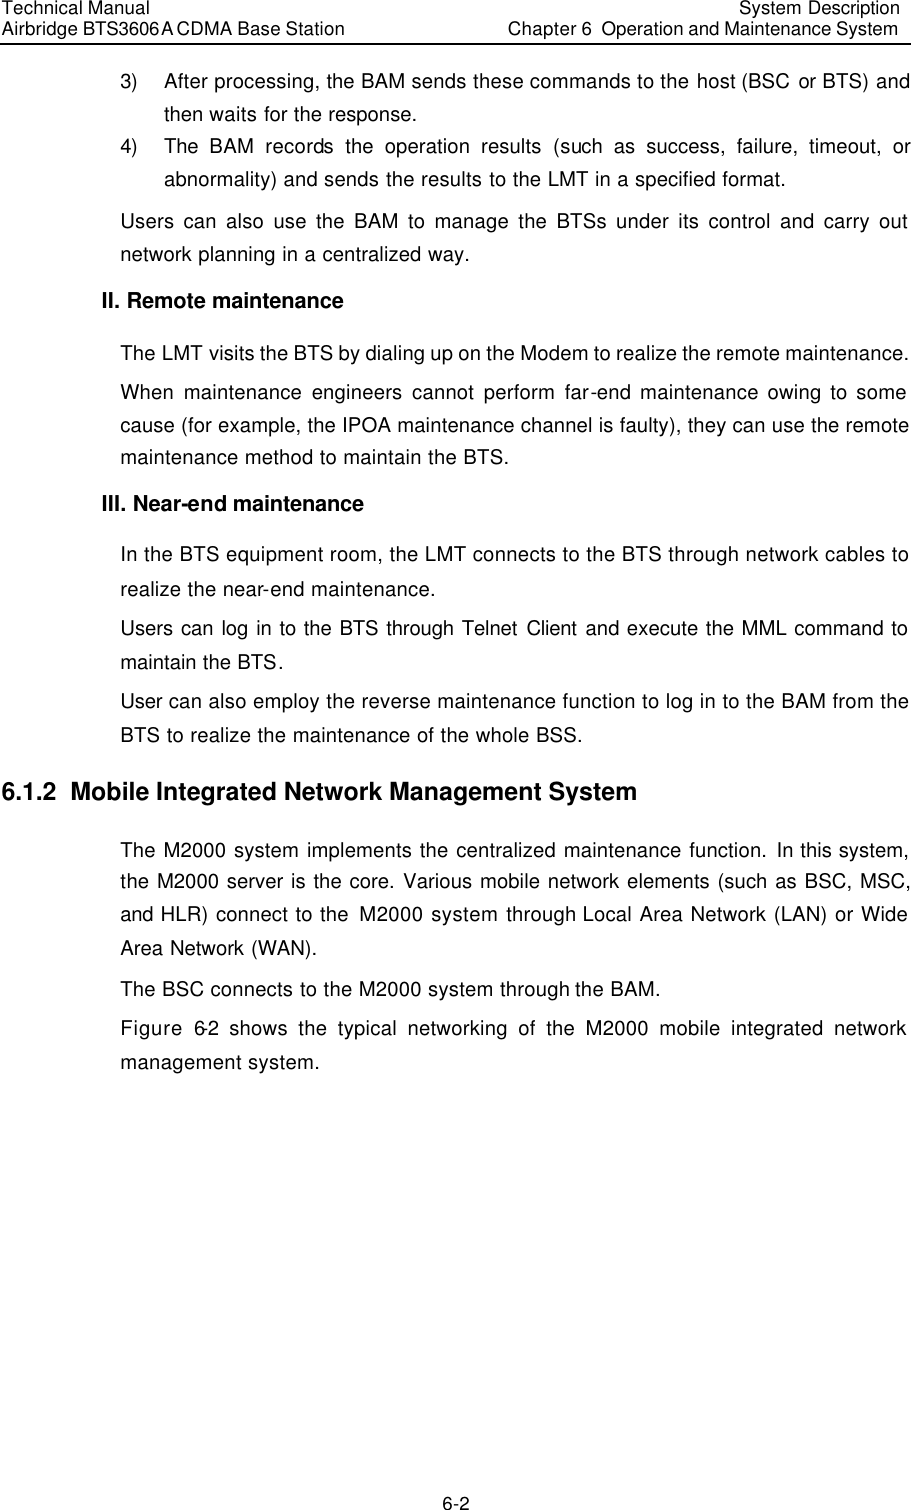 Technical Manual Airbridge BTS3606A CDMA Base Station System Description Chapter 6  Operation and Maintenance System   6-2 3) After processing, the BAM sends these commands to the host (BSC or BTS) and then waits for the response. 4) The  BAM records the operation results (such as success, failure, timeout, or abnormality) and sends the results to the LMT in a specified format. Users can also use the BAM to manage the BTSs under its control and carry out network planning in a centralized way.  II. Remote maintenance The LMT visits the BTS by dialing up on the Modem to realize the remote maintenance. When maintenance engineers cannot perform far-end maintenance owing to some cause (for example, the IPOA maintenance channel is faulty), they can use the remote maintenance method to maintain the BTS. III. Near-end maintenance In the BTS equipment room, the LMT connects to the BTS through network cables to realize the near-end maintenance.  Users can log in to the BTS through Telnet Client and execute the MML command to maintain the BTS. User can also employ the reverse maintenance function to log in to the BAM from the BTS to realize the maintenance of the whole BSS. 6.1.2  Mobile Integrated Network Management System The M2000 system implements the centralized maintenance function. In this system, the M2000 server is the core. Various mobile network elements (such as BSC, MSC, and HLR) connect to the M2000 system through Local Area Network (LAN) or Wide Area Network (WAN). The BSC connects to the M2000 system through the BAM. Figure 6-2 shows the typical networking of the M2000 mobile integrated network management system. 